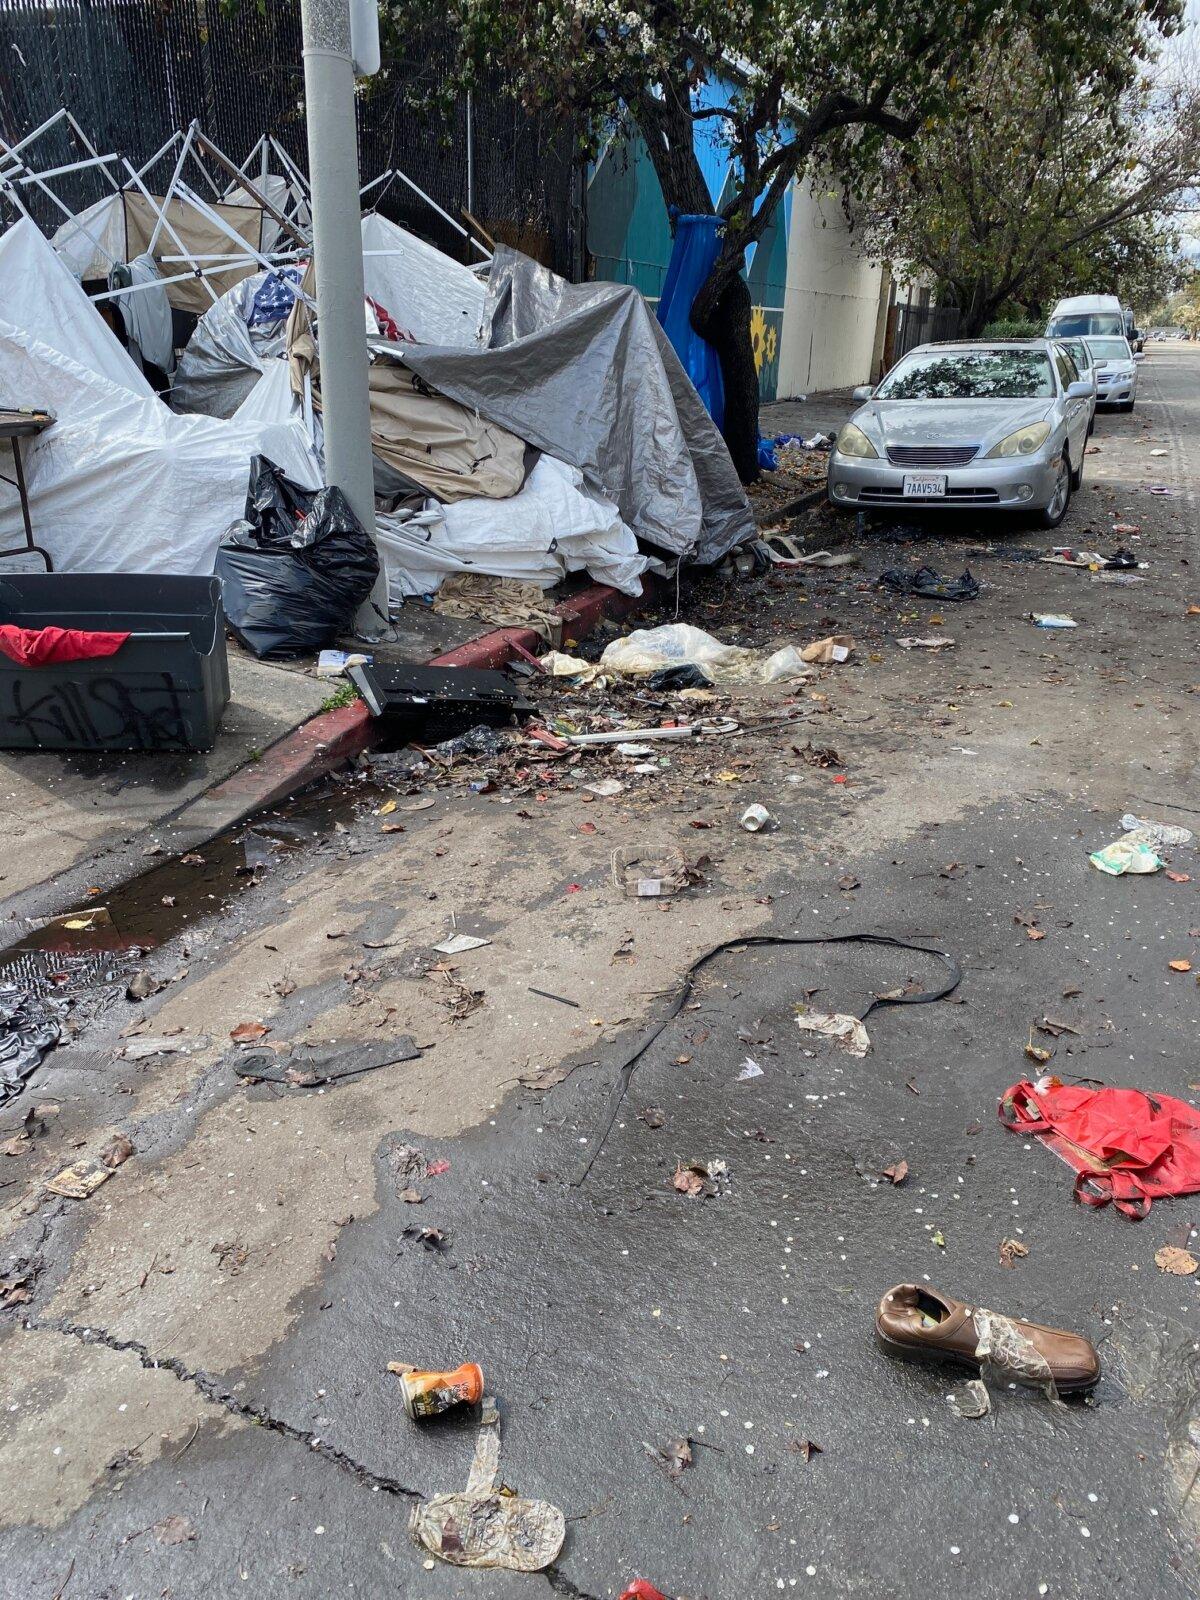 A homeless encampment on Harold Way and Western Ave in Hollywood. (Courtesy of Keith Johnson)